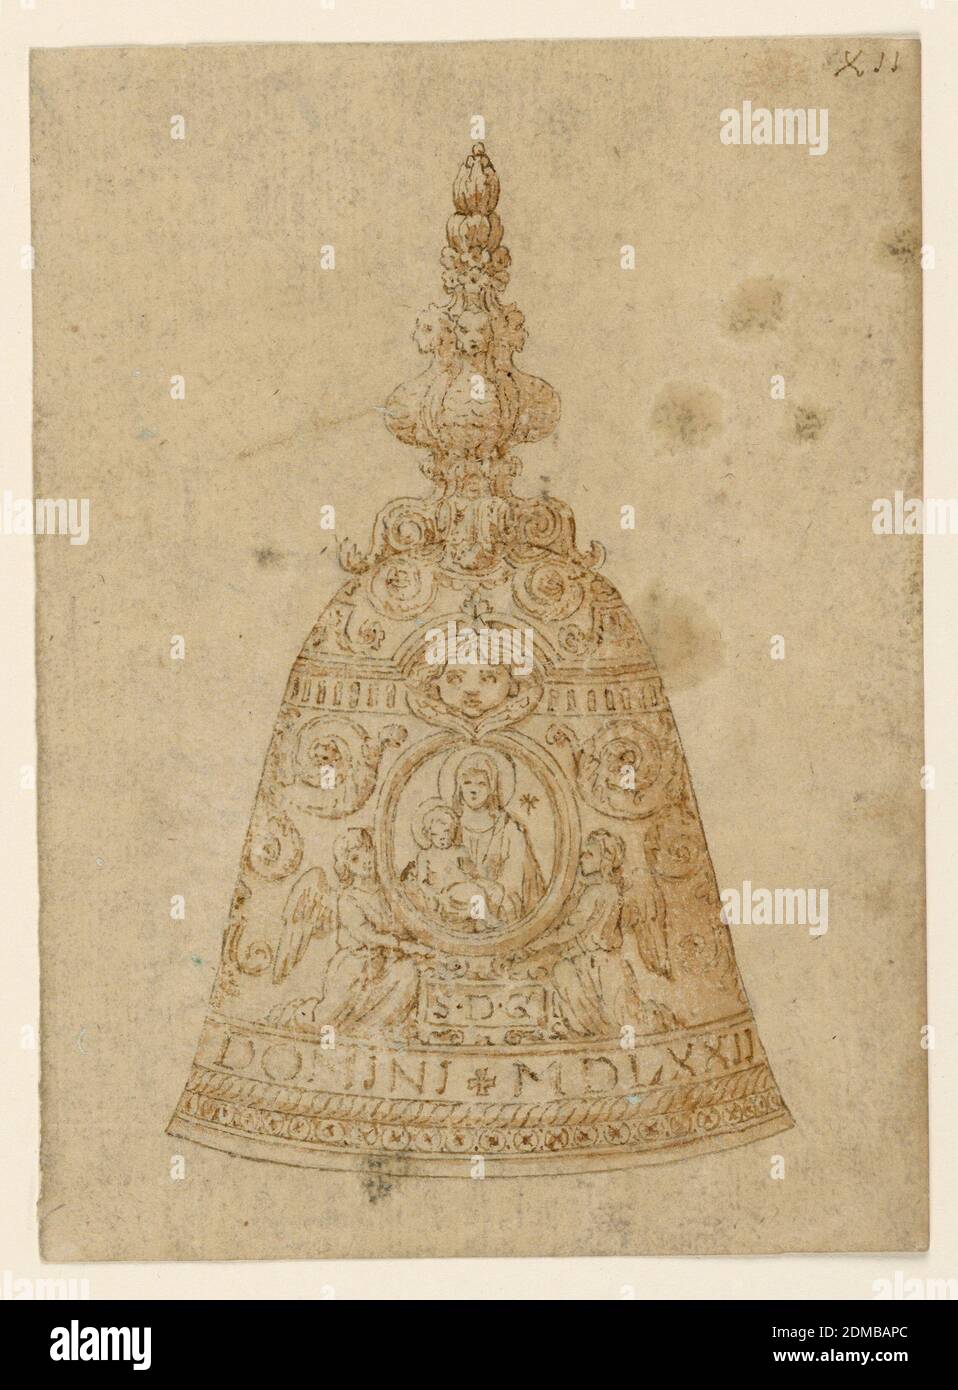 Hand bell, Pen, sepia and red-brown watercolor on brown-grey paper, Vertical rectangle. The handle consists of birds with woman heads, with scrolls below, rows of columns, and leaves above. The main field of the body is decorated with two kneeling angels supporting an oval representation of the Virgin with the Child, above it is a cherub. Rinceaux are at the sides. The framing moulding is curved above the cherub. Below the representation is a tablet with 'S.D.G.' Below is a band with 'DOMINI M D L X X I I.', Italy, 1572, tableware designs, Drawing Stock Photo